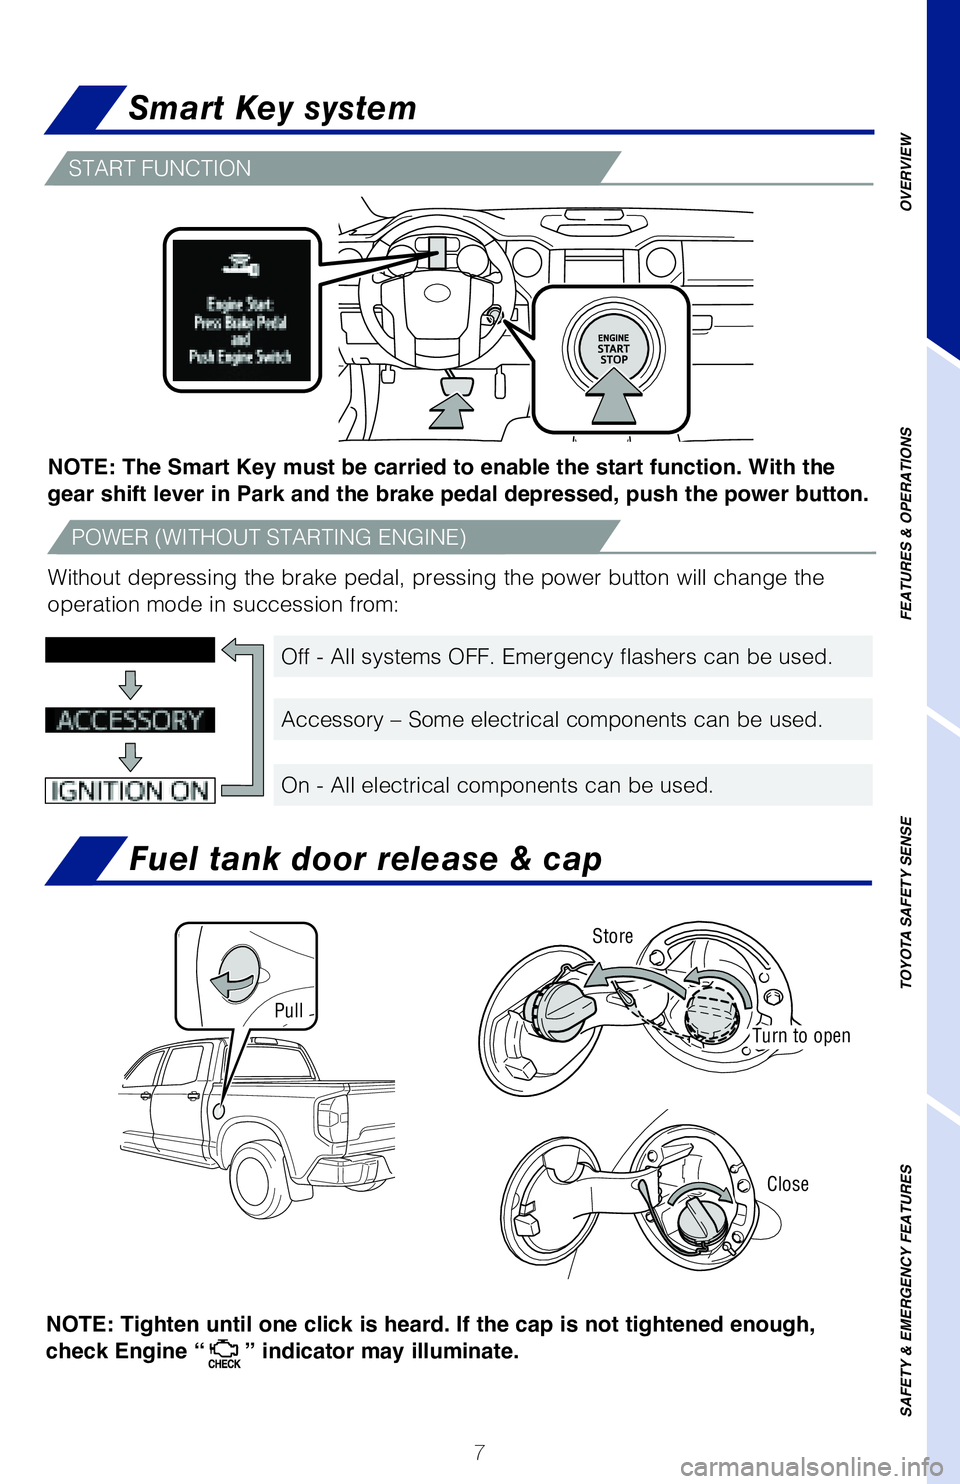 TOYOTA TUNDRA 2021  Owners Manual (in English) 7
NOTE: If a door is not opened within 60 seconds of unlocking, all doors will relock for 
safety.
OVERVIEW
FEATURES & OPERATIONS
TOYOTA SAFETY SENSE
SAFETY & EMERGENCY FEATURES
Fuel tank door release